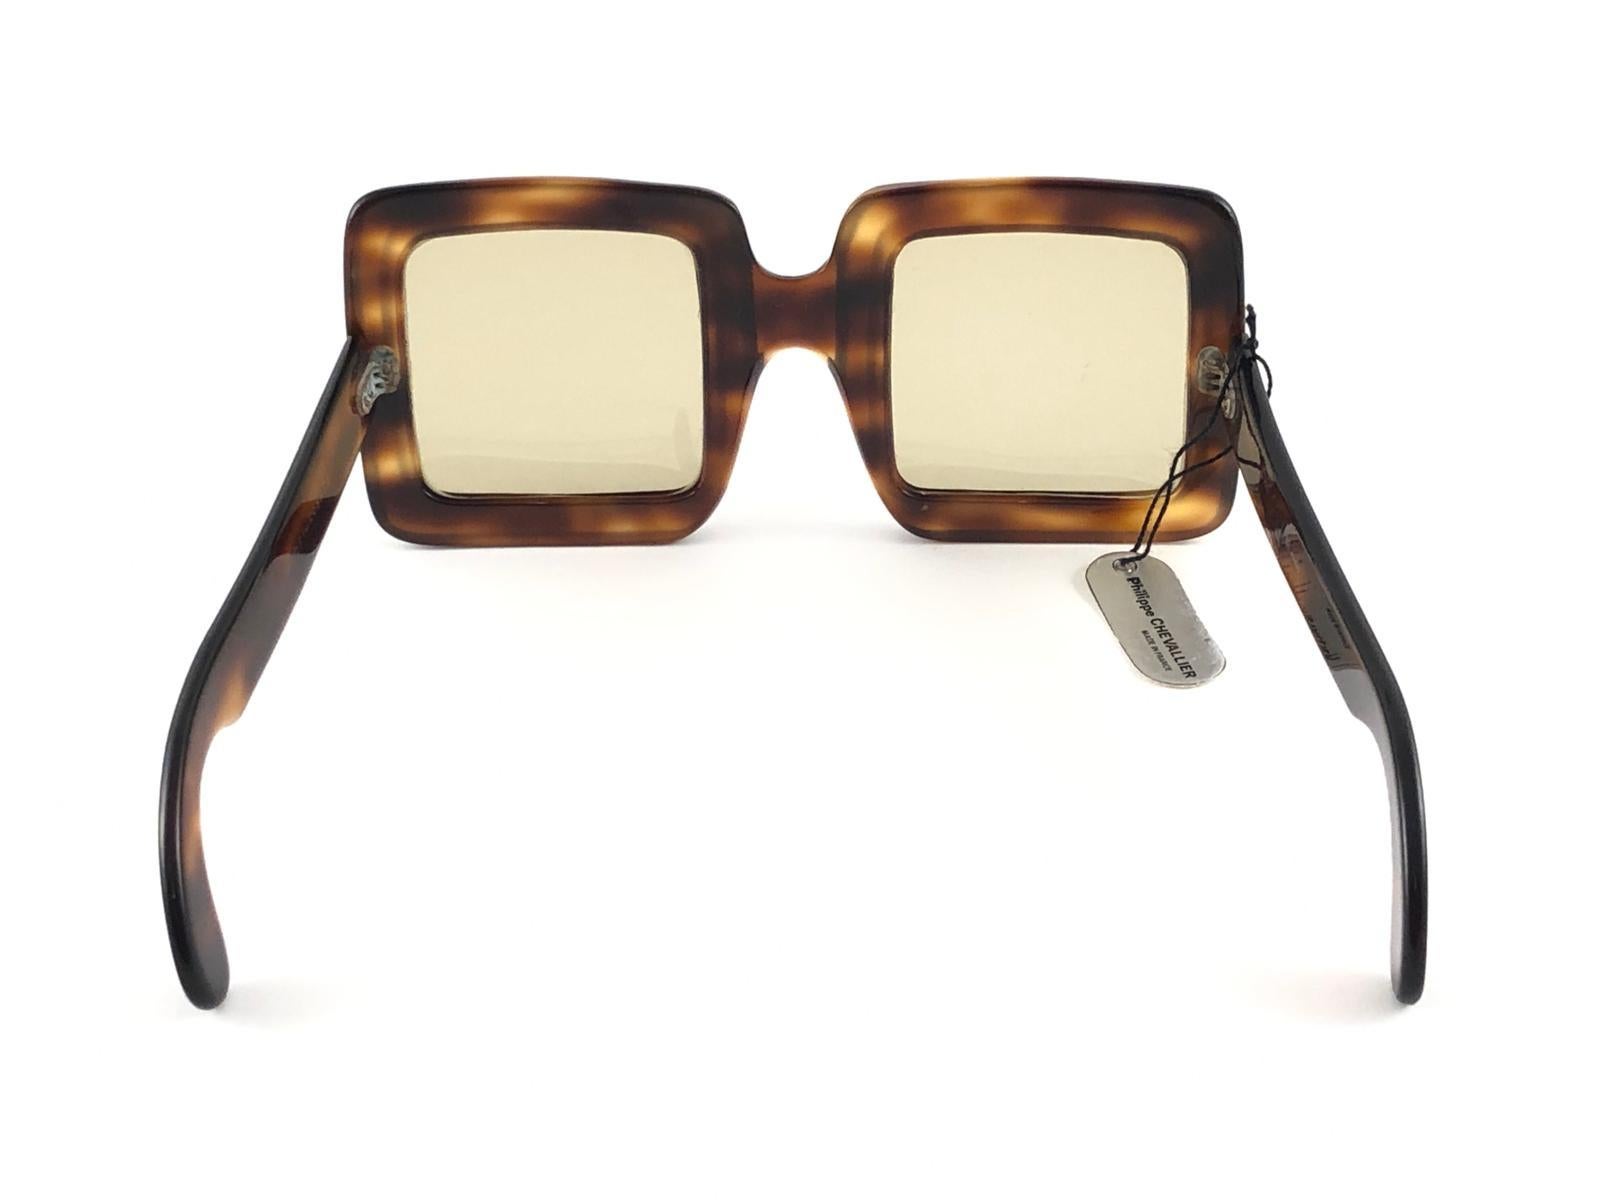 Rare Vintage Lanvin by Philippe Chevallier Tortoise Oversized 1960 Sunglasses For Sale 4